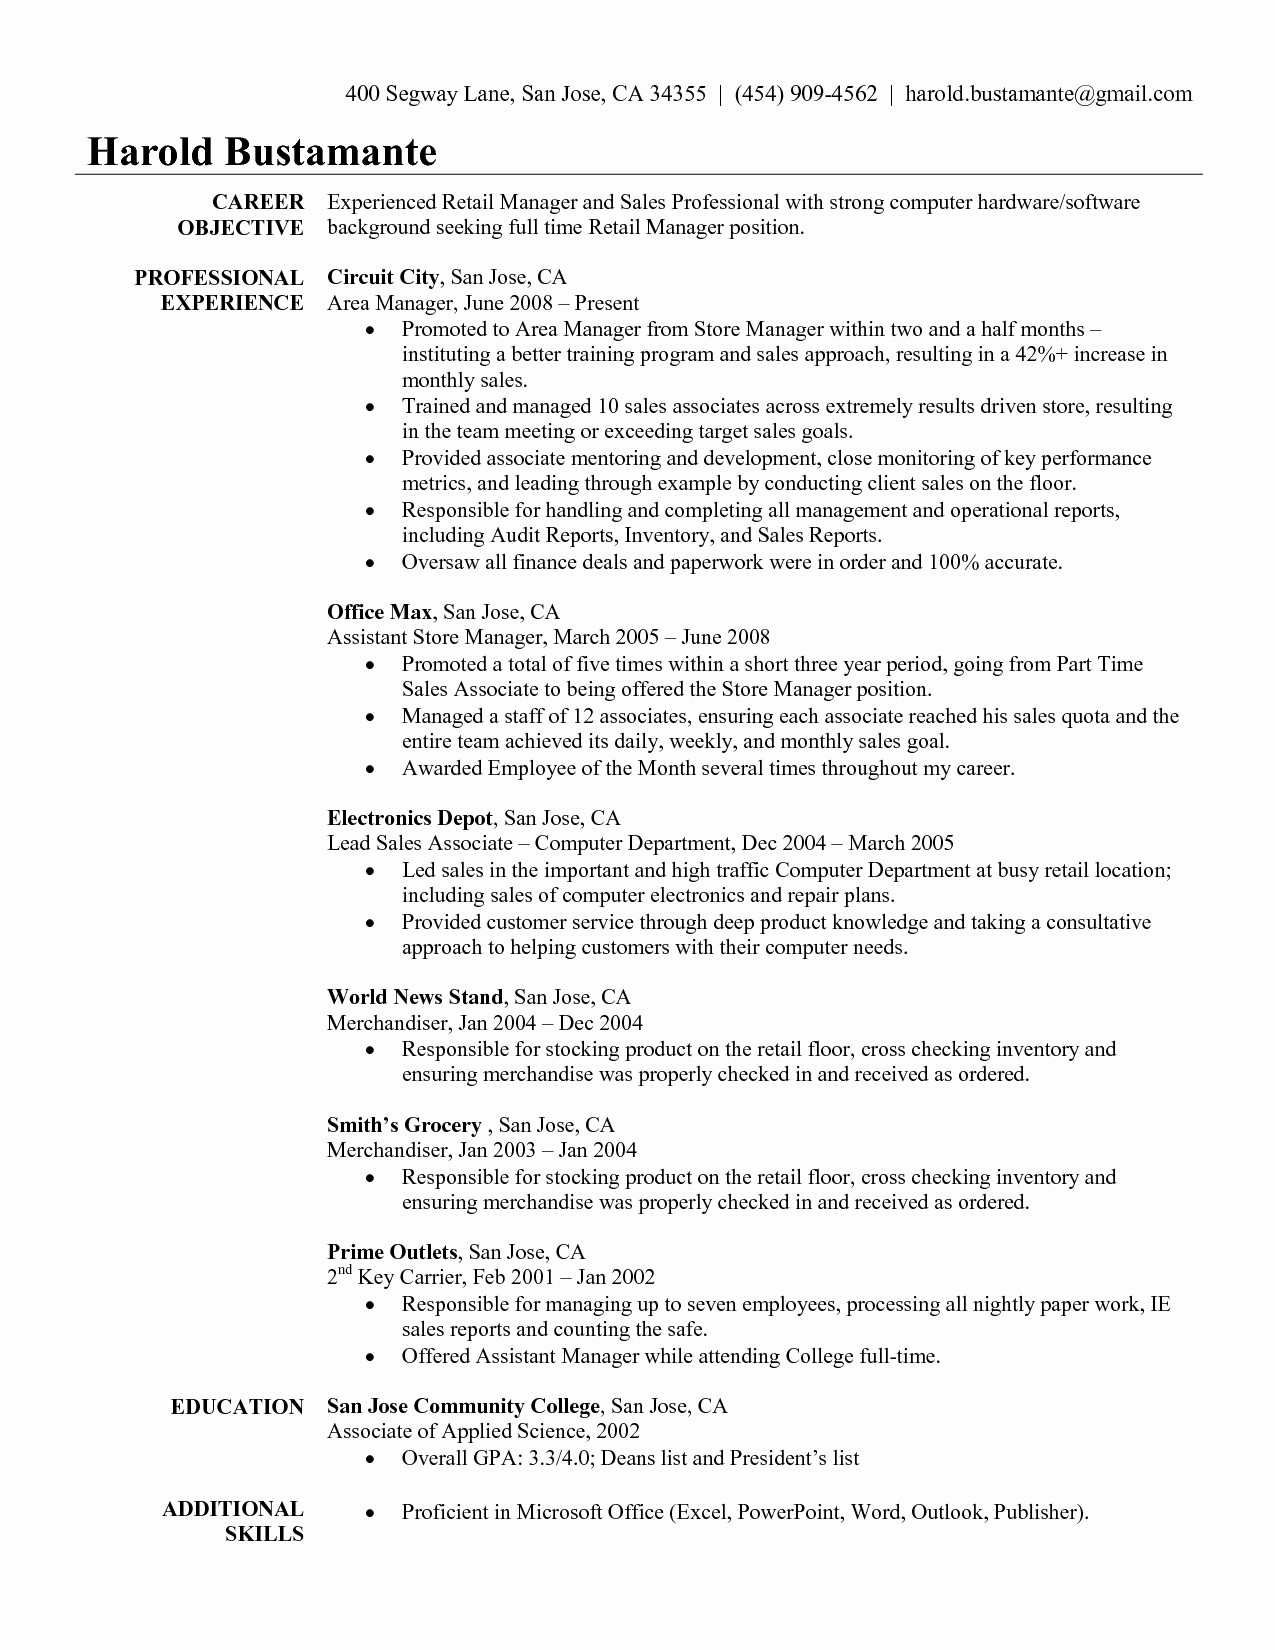 Objective Resume Ideas Awesome Sales Manager Resume Objective Examples Resume Ideas